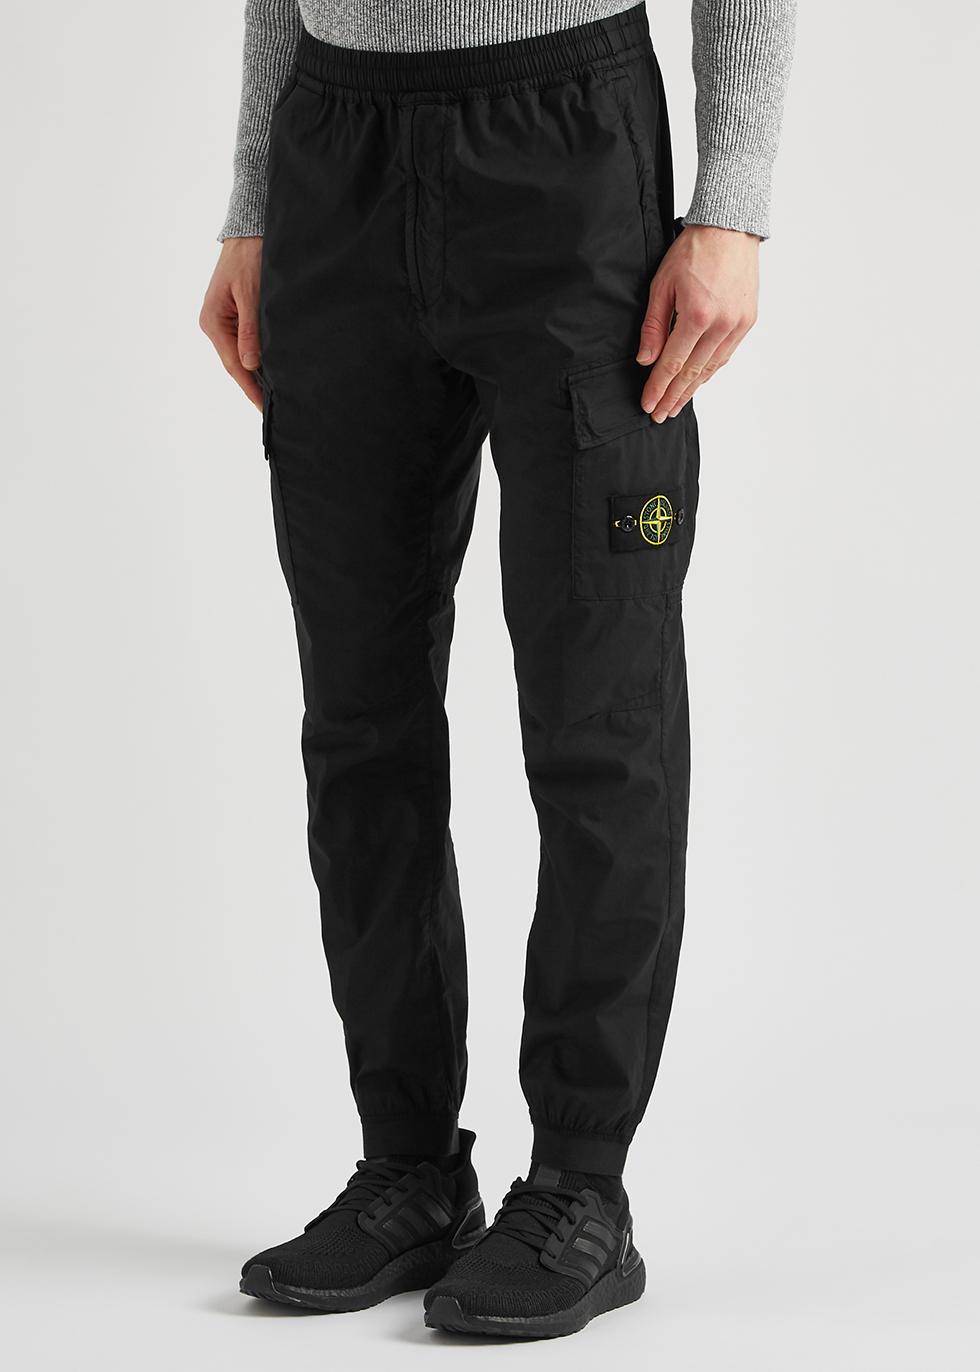 Stone Island Stretch-cotton Cargo Trousers in Black for Men - Lyst